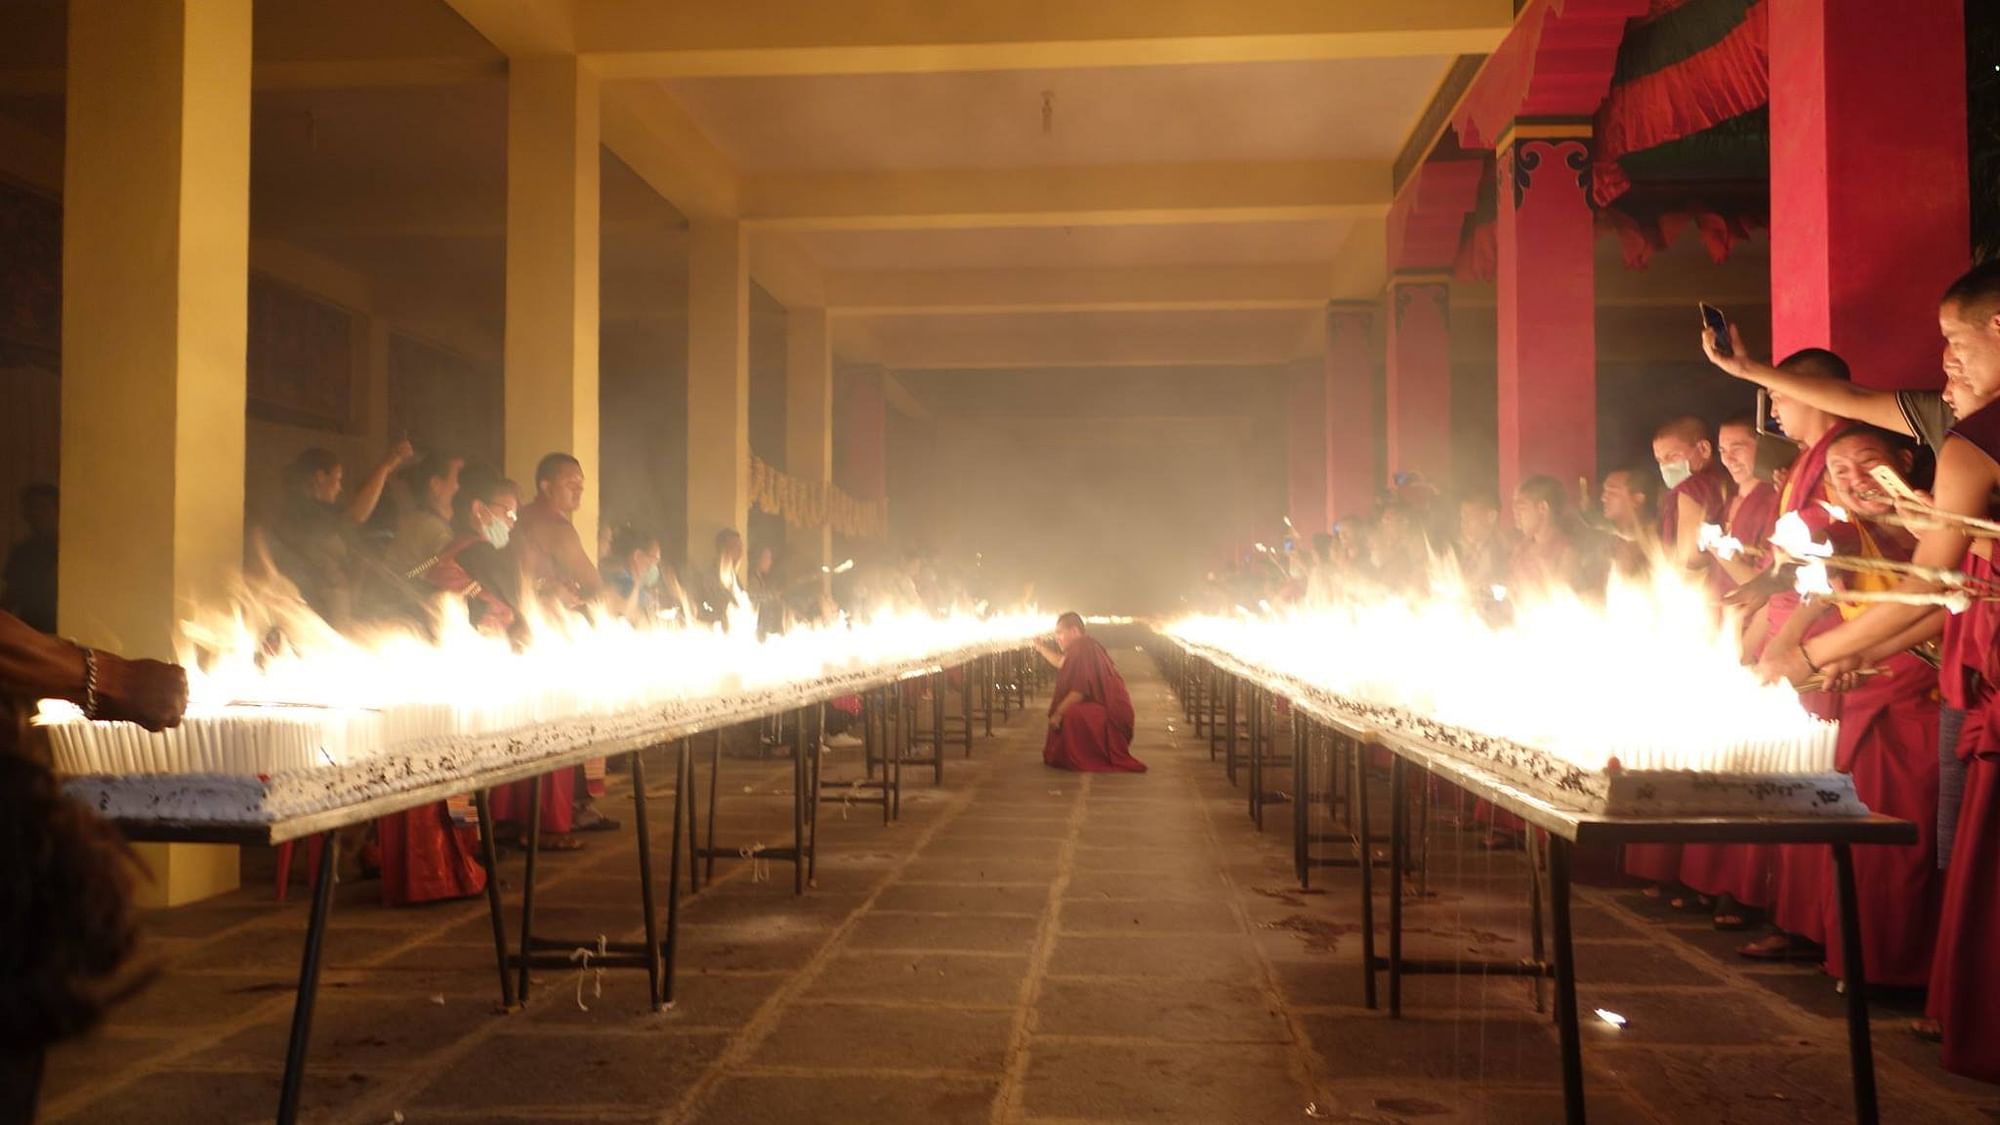 More than 200 Tibetans lit 1,30,232 candles, one for every Tibetan living in exile.